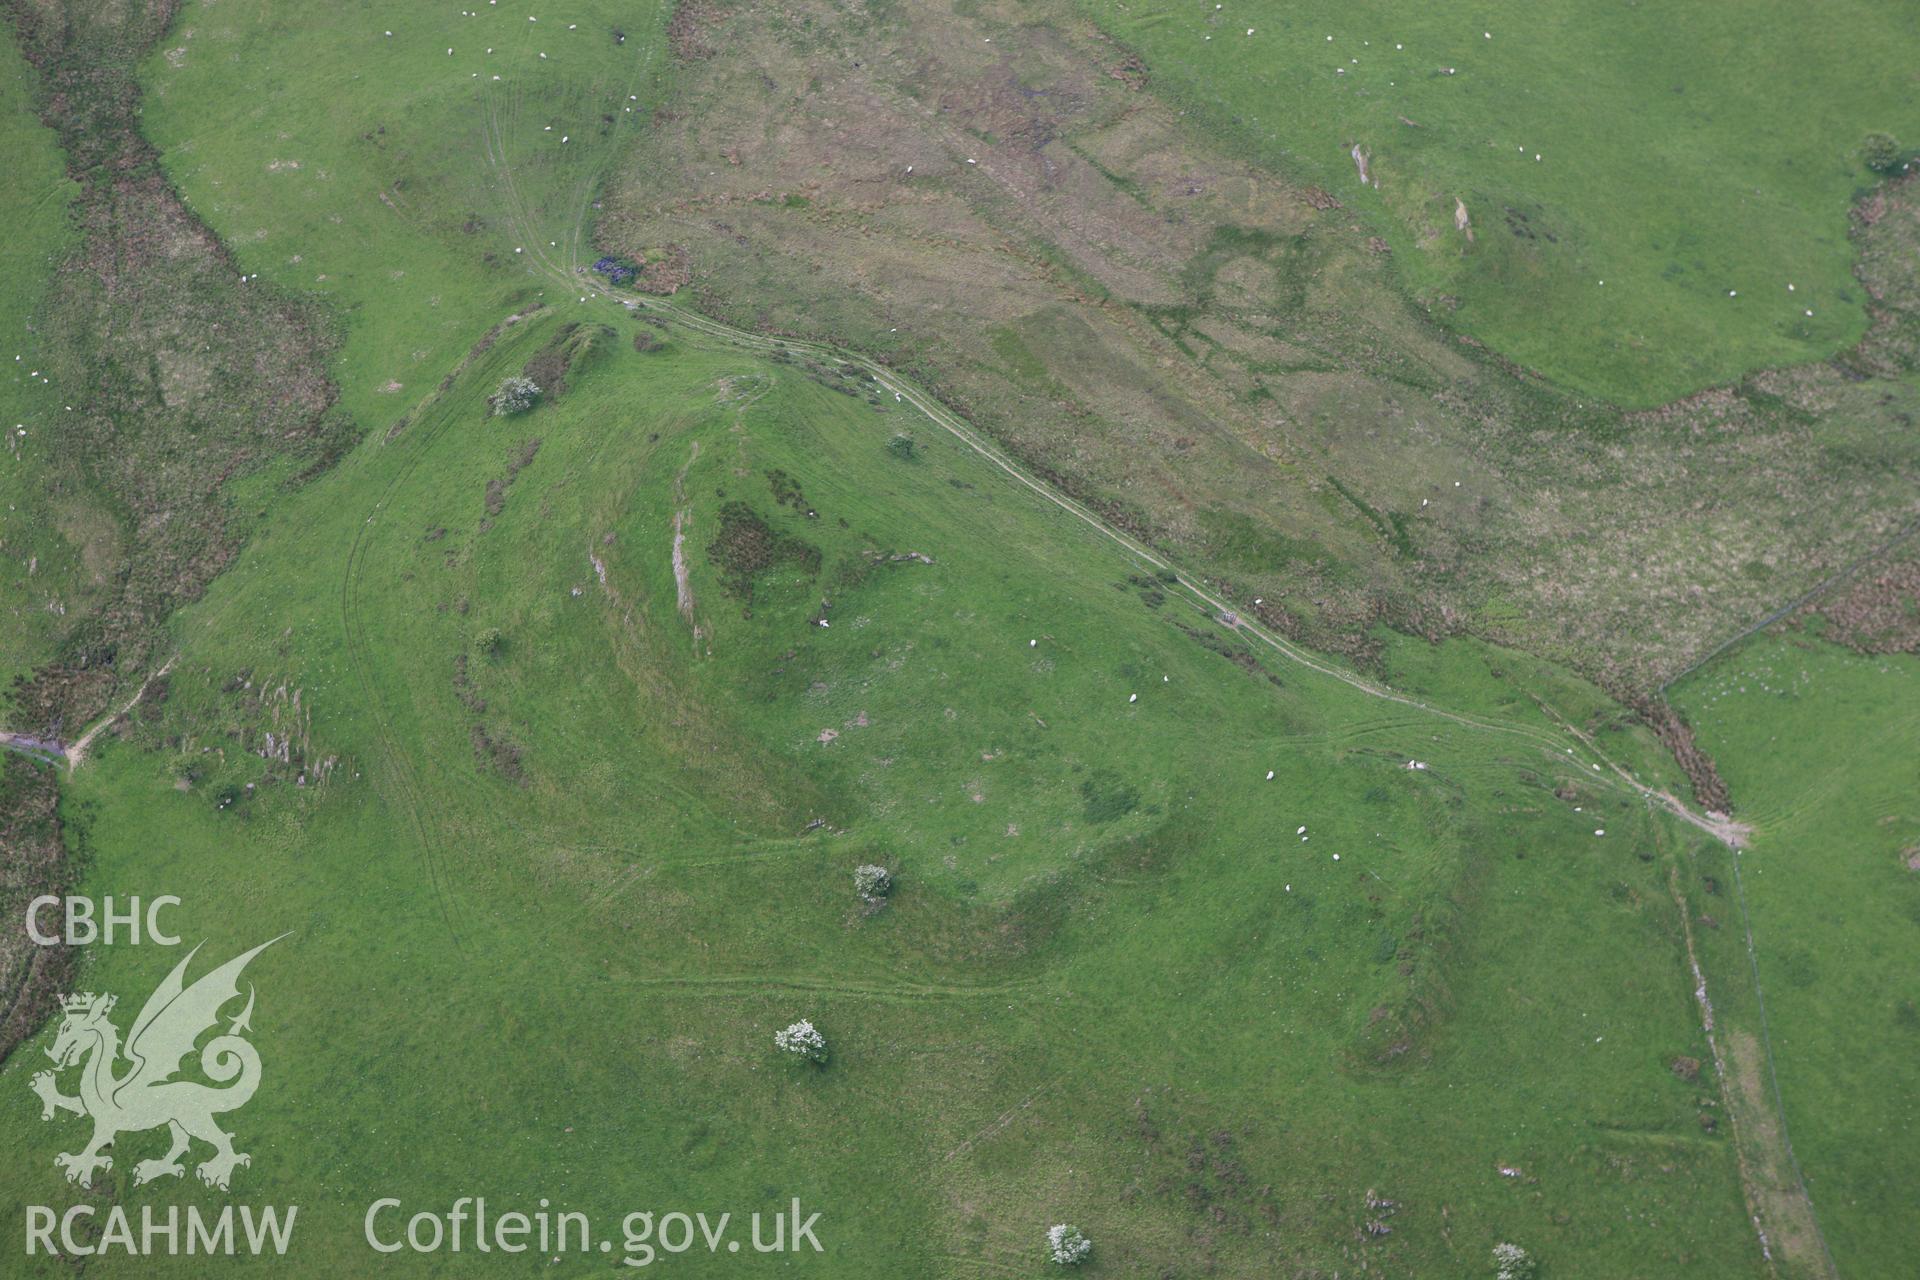 RCAHMW colour oblique aerial photograph of Pen Dinas. Taken on 02 June 2009 by Toby Driver